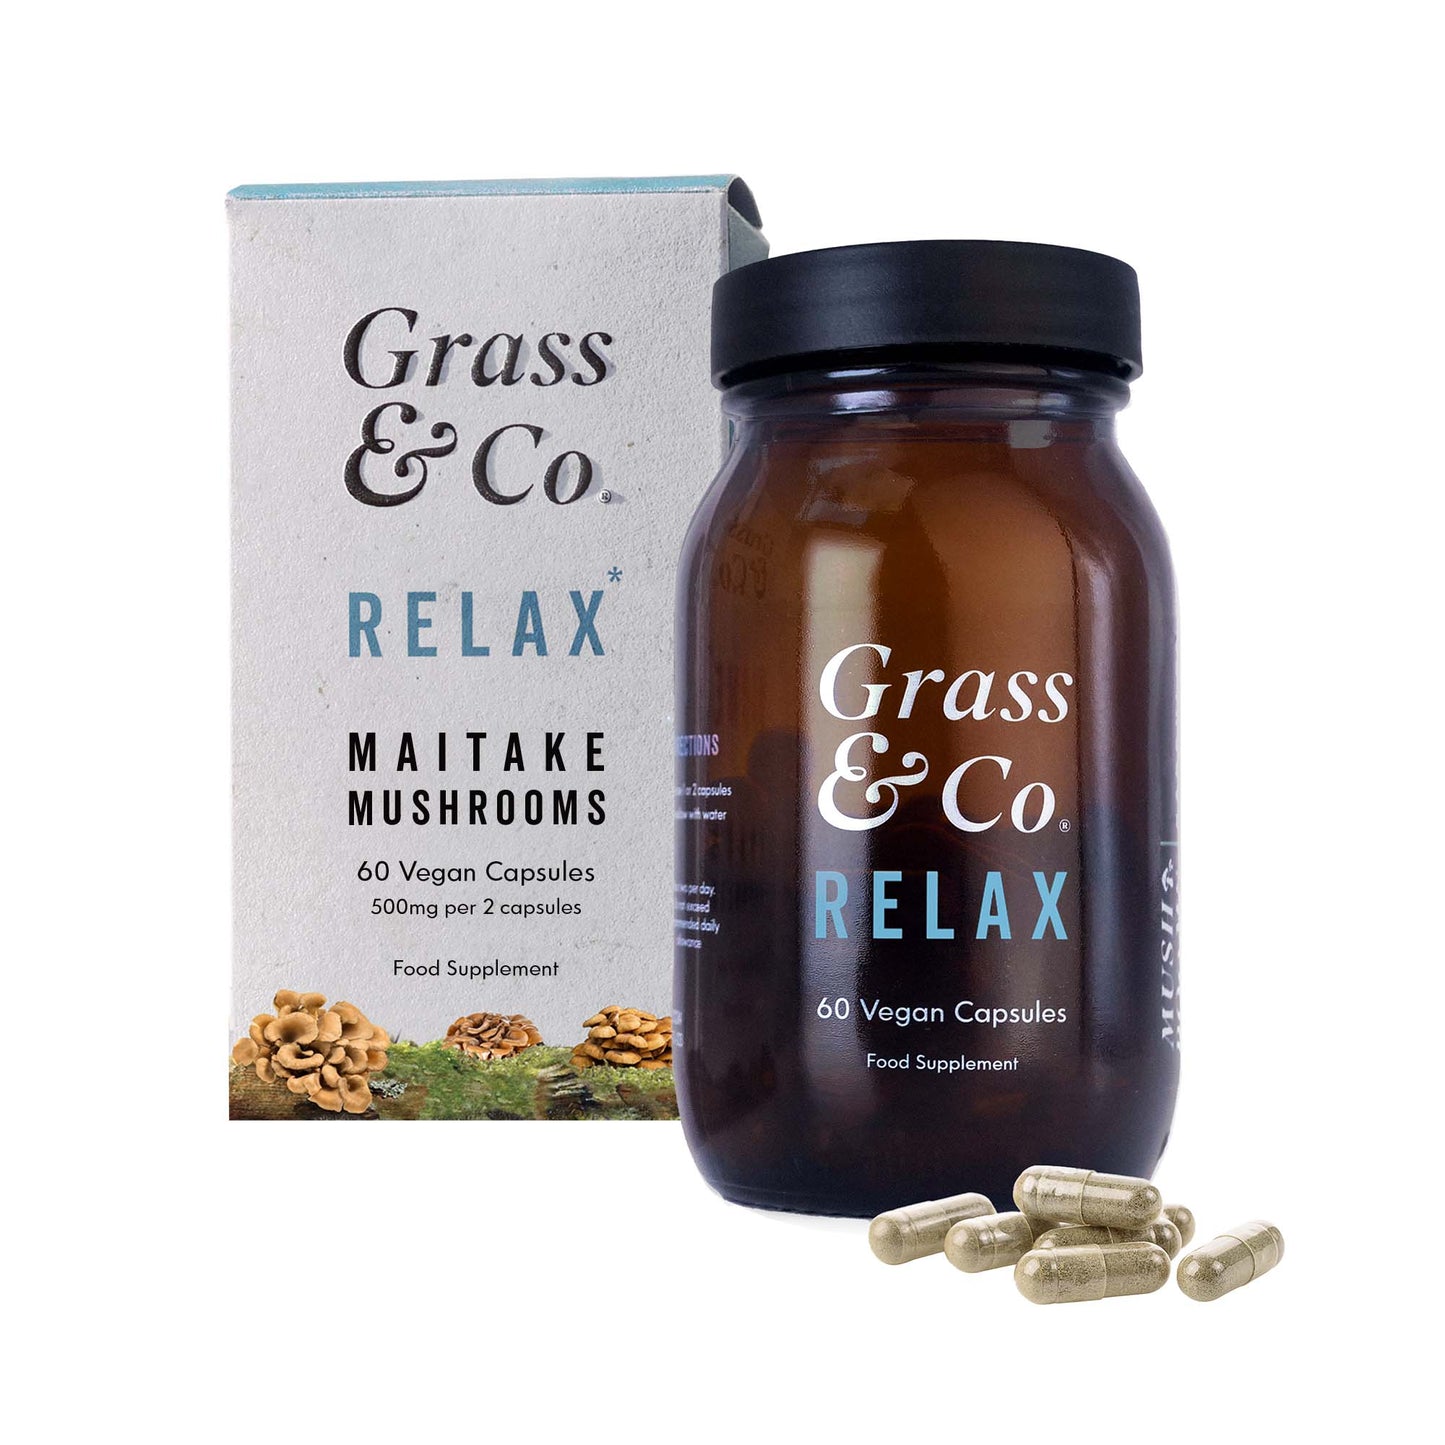 RELAX - Maitake Mushroom Supplement Capsules with Ashwagandha + Magnesium for Anxiety & Stress